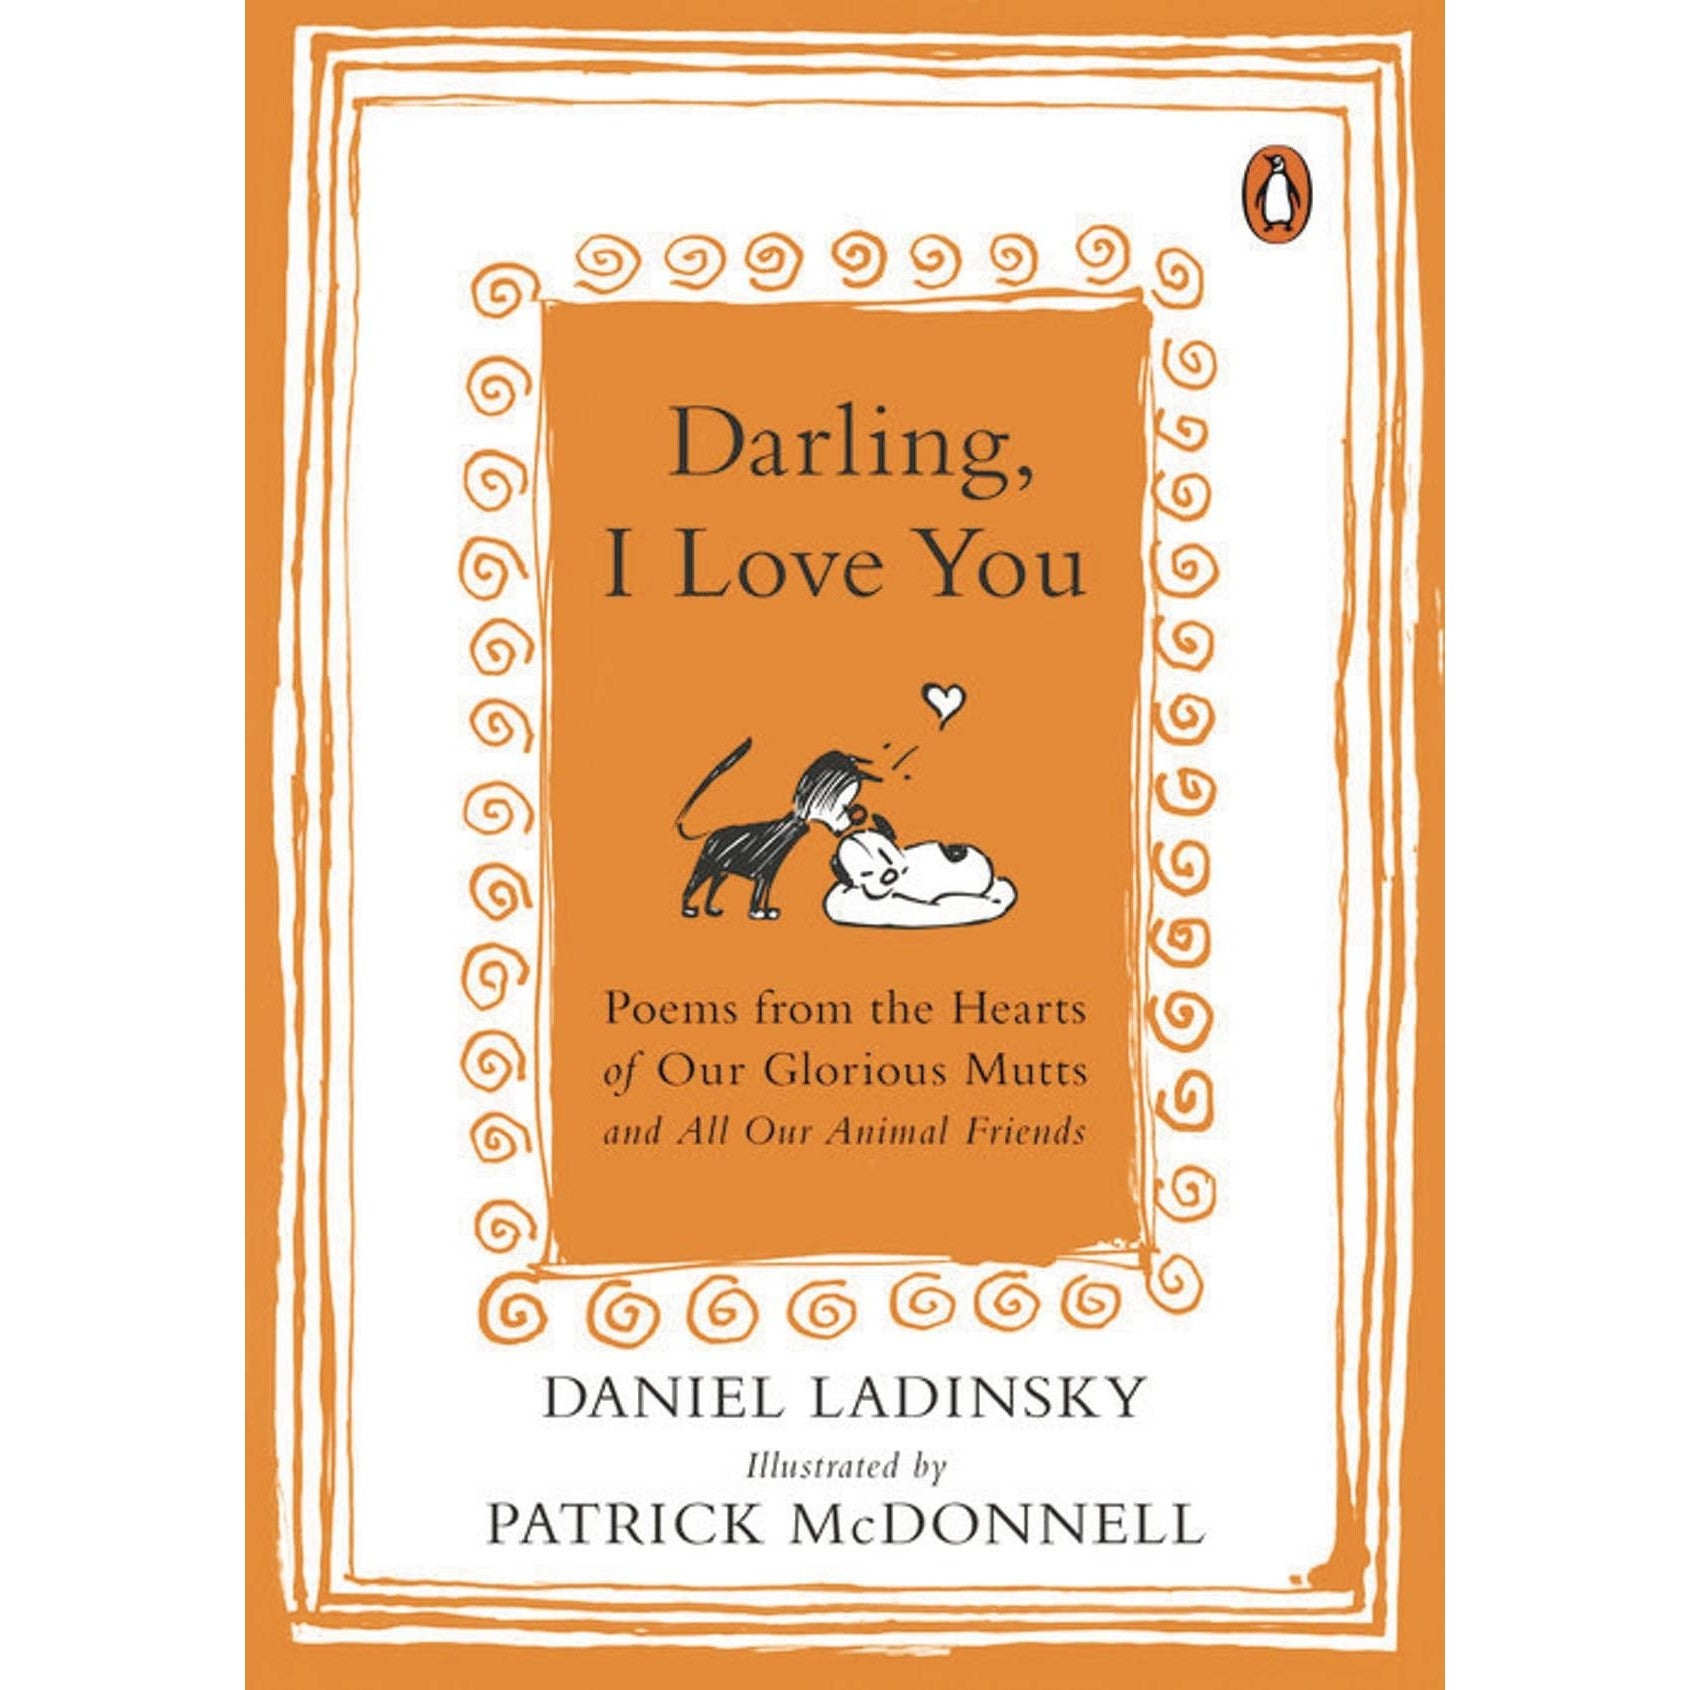 DARLING I LOVE YOU POEMS FROM HEARTS OF MUTTS TP